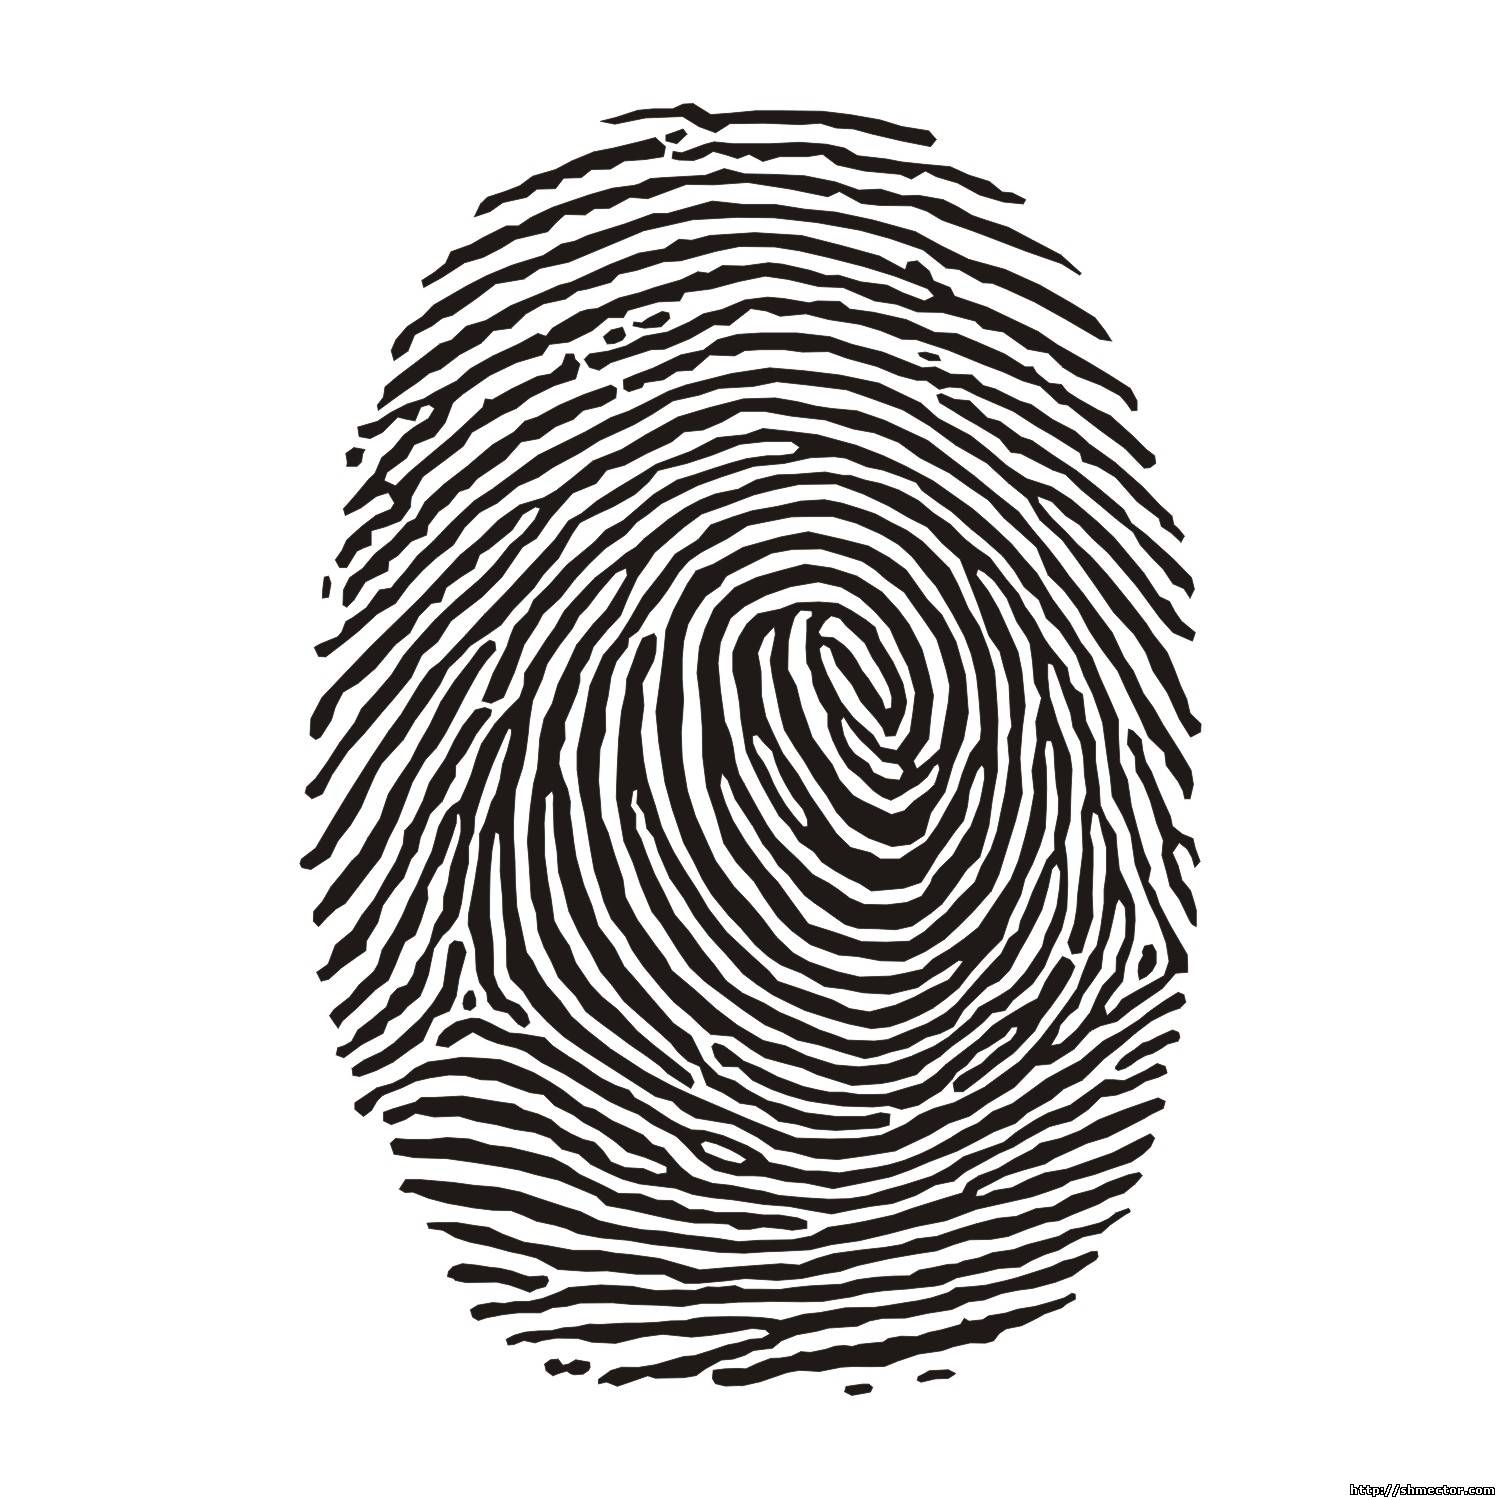 Russian Scientists Use Fingerprints To Find Most Suitable Job For You